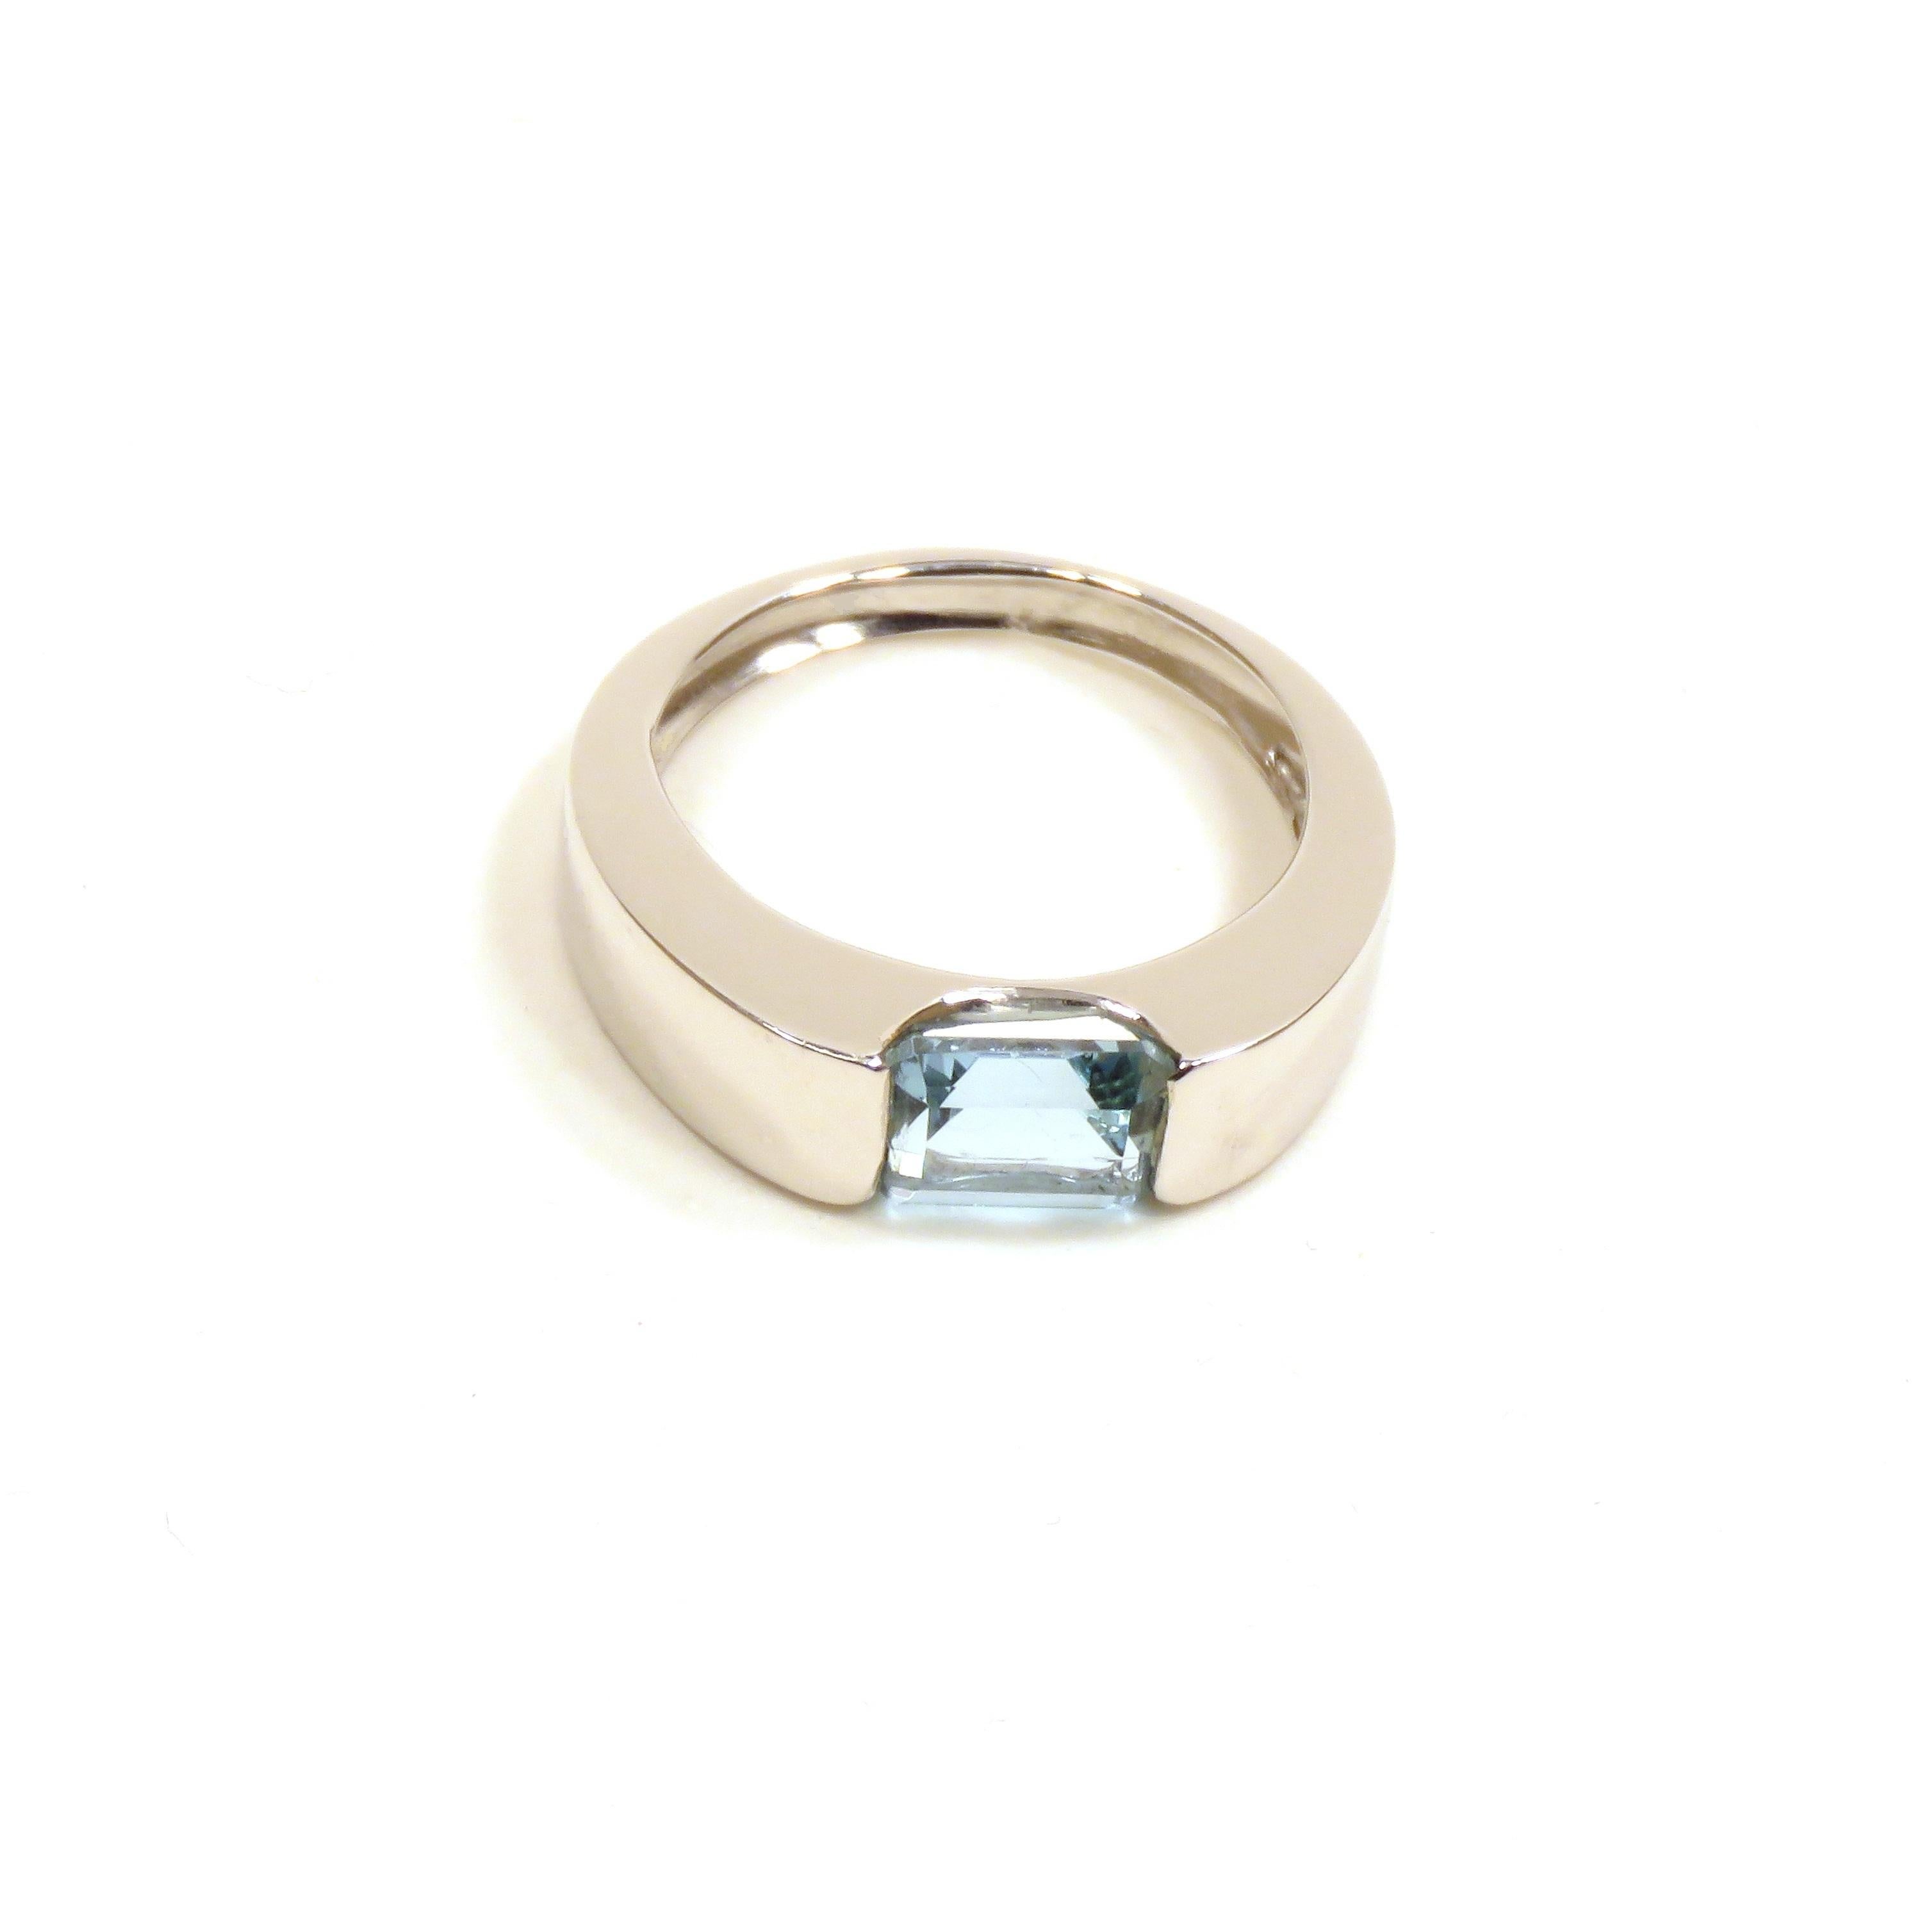 Aquamarine White 18 Karat Gold Band Ring Handcrafted in Italy by Botta Gioielli 1